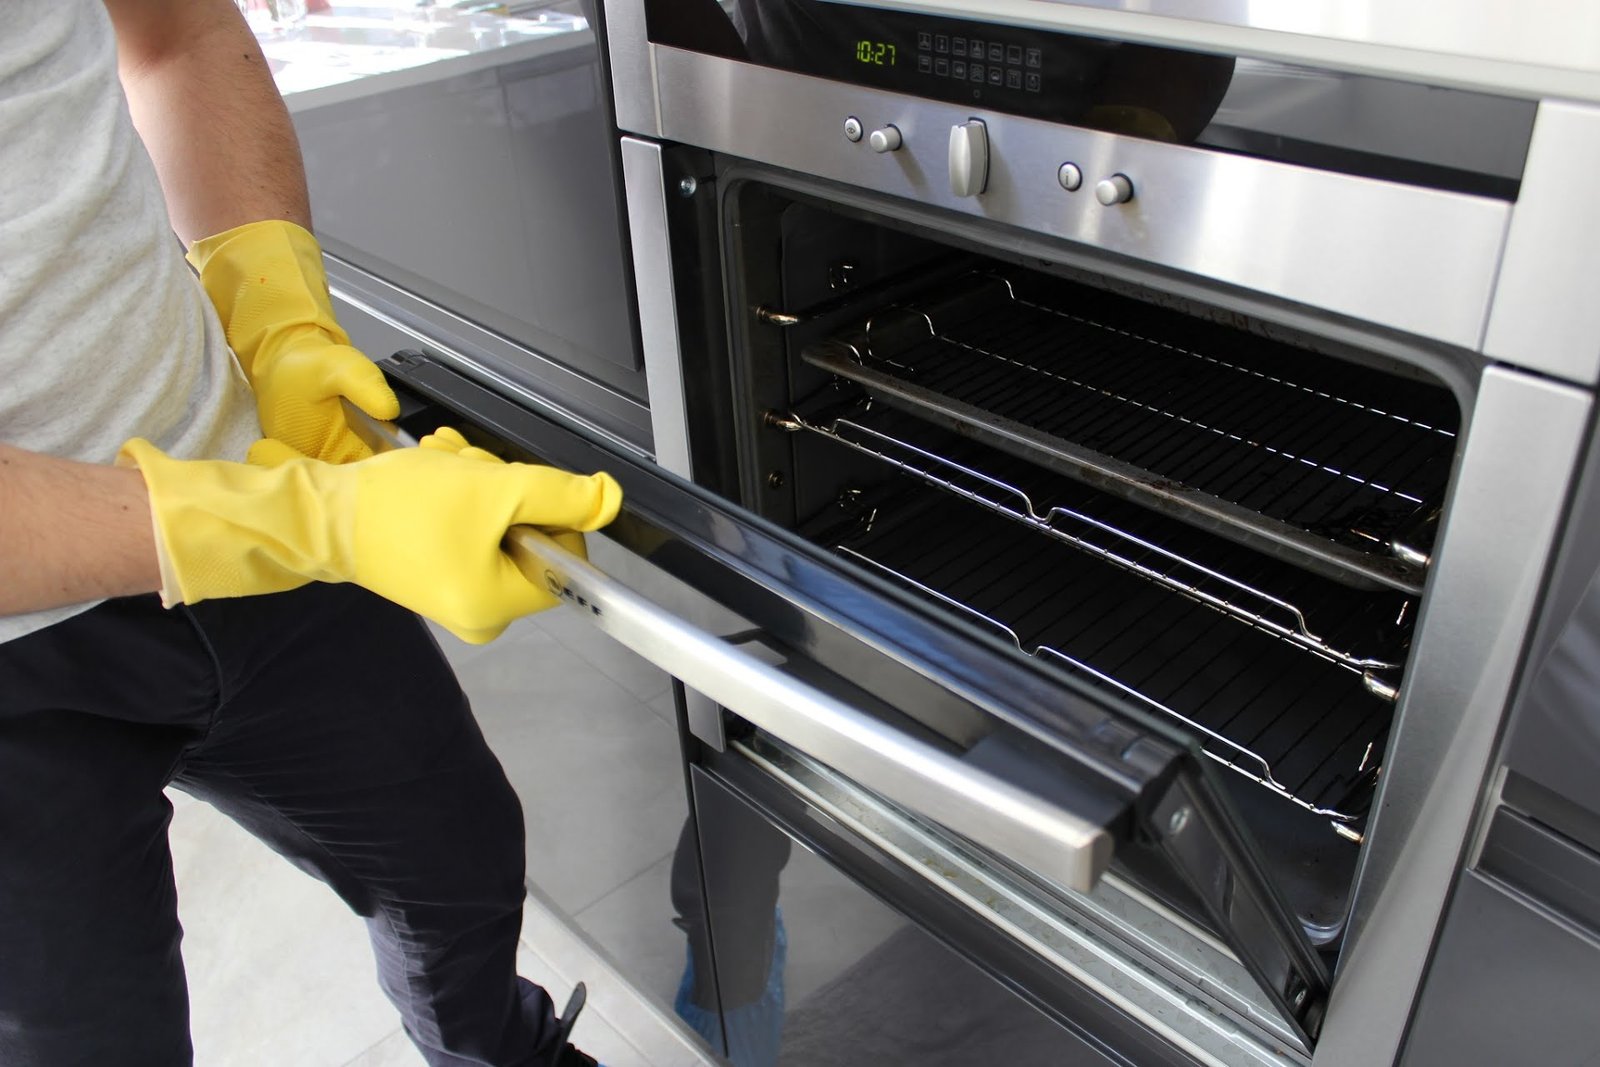 Essential Oven Cleaning Hacks for Busy Home Cooks